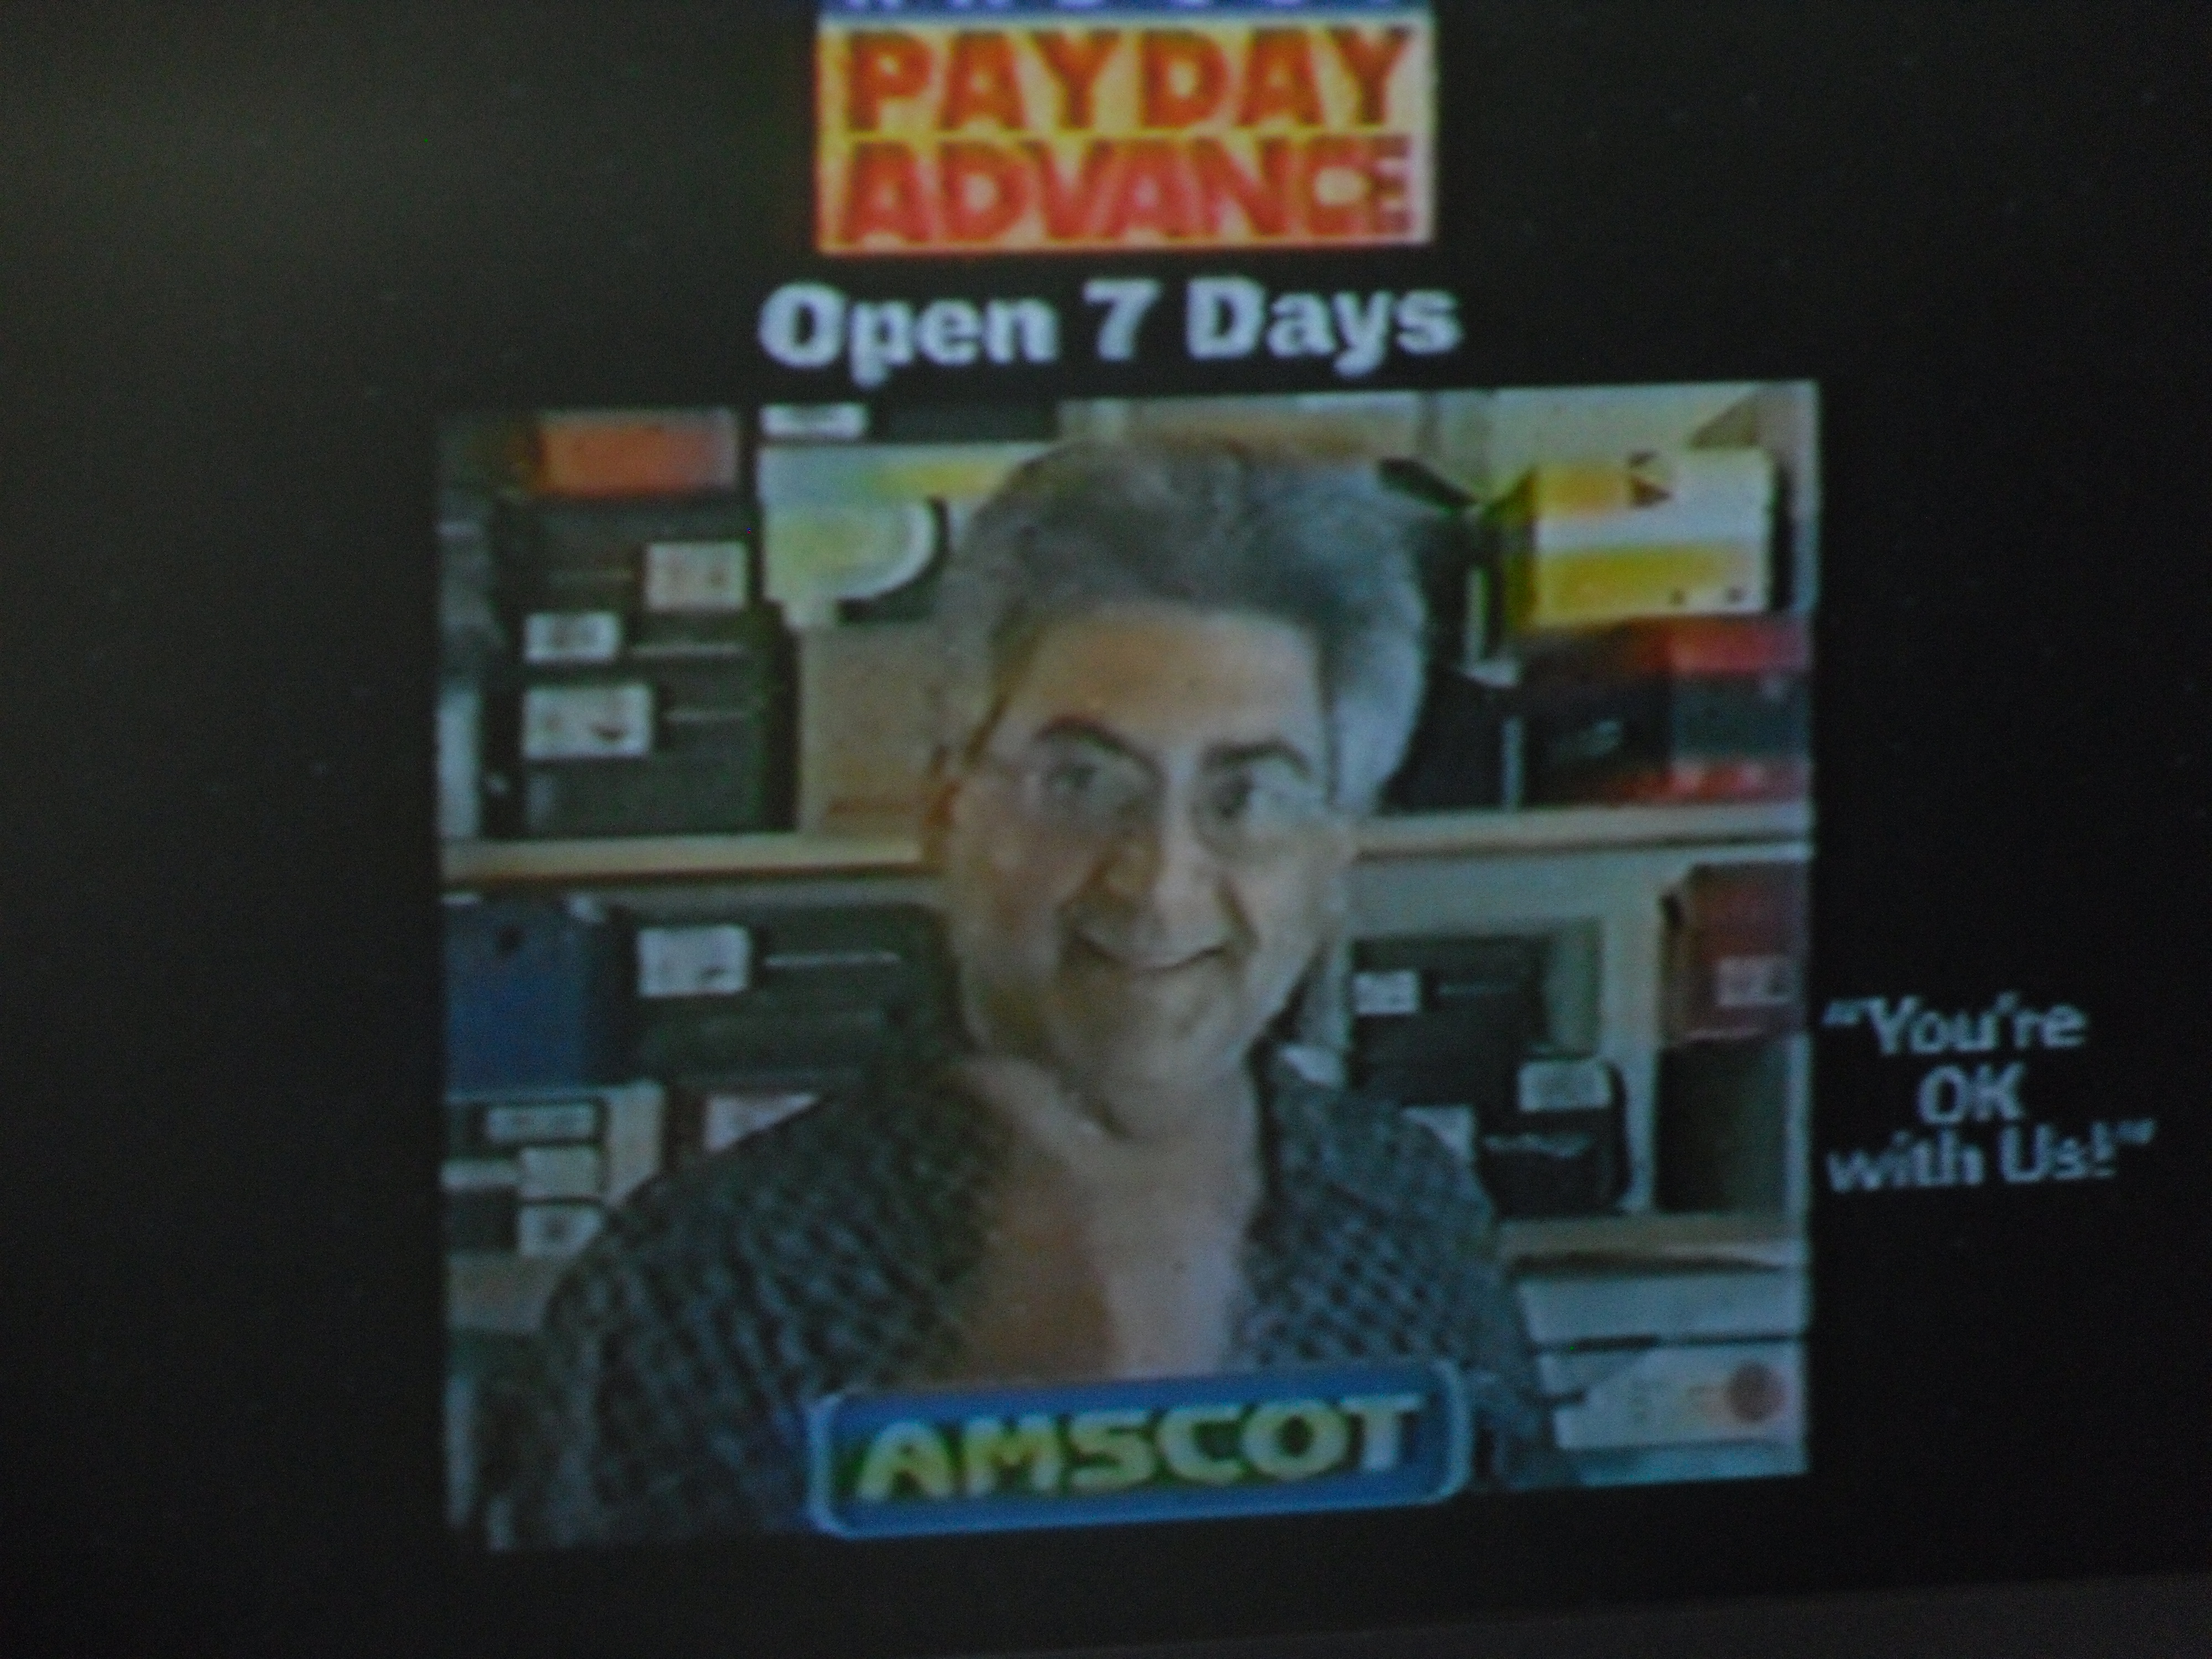 As the lead actor in the Amscot commercial, which played for 2 years.